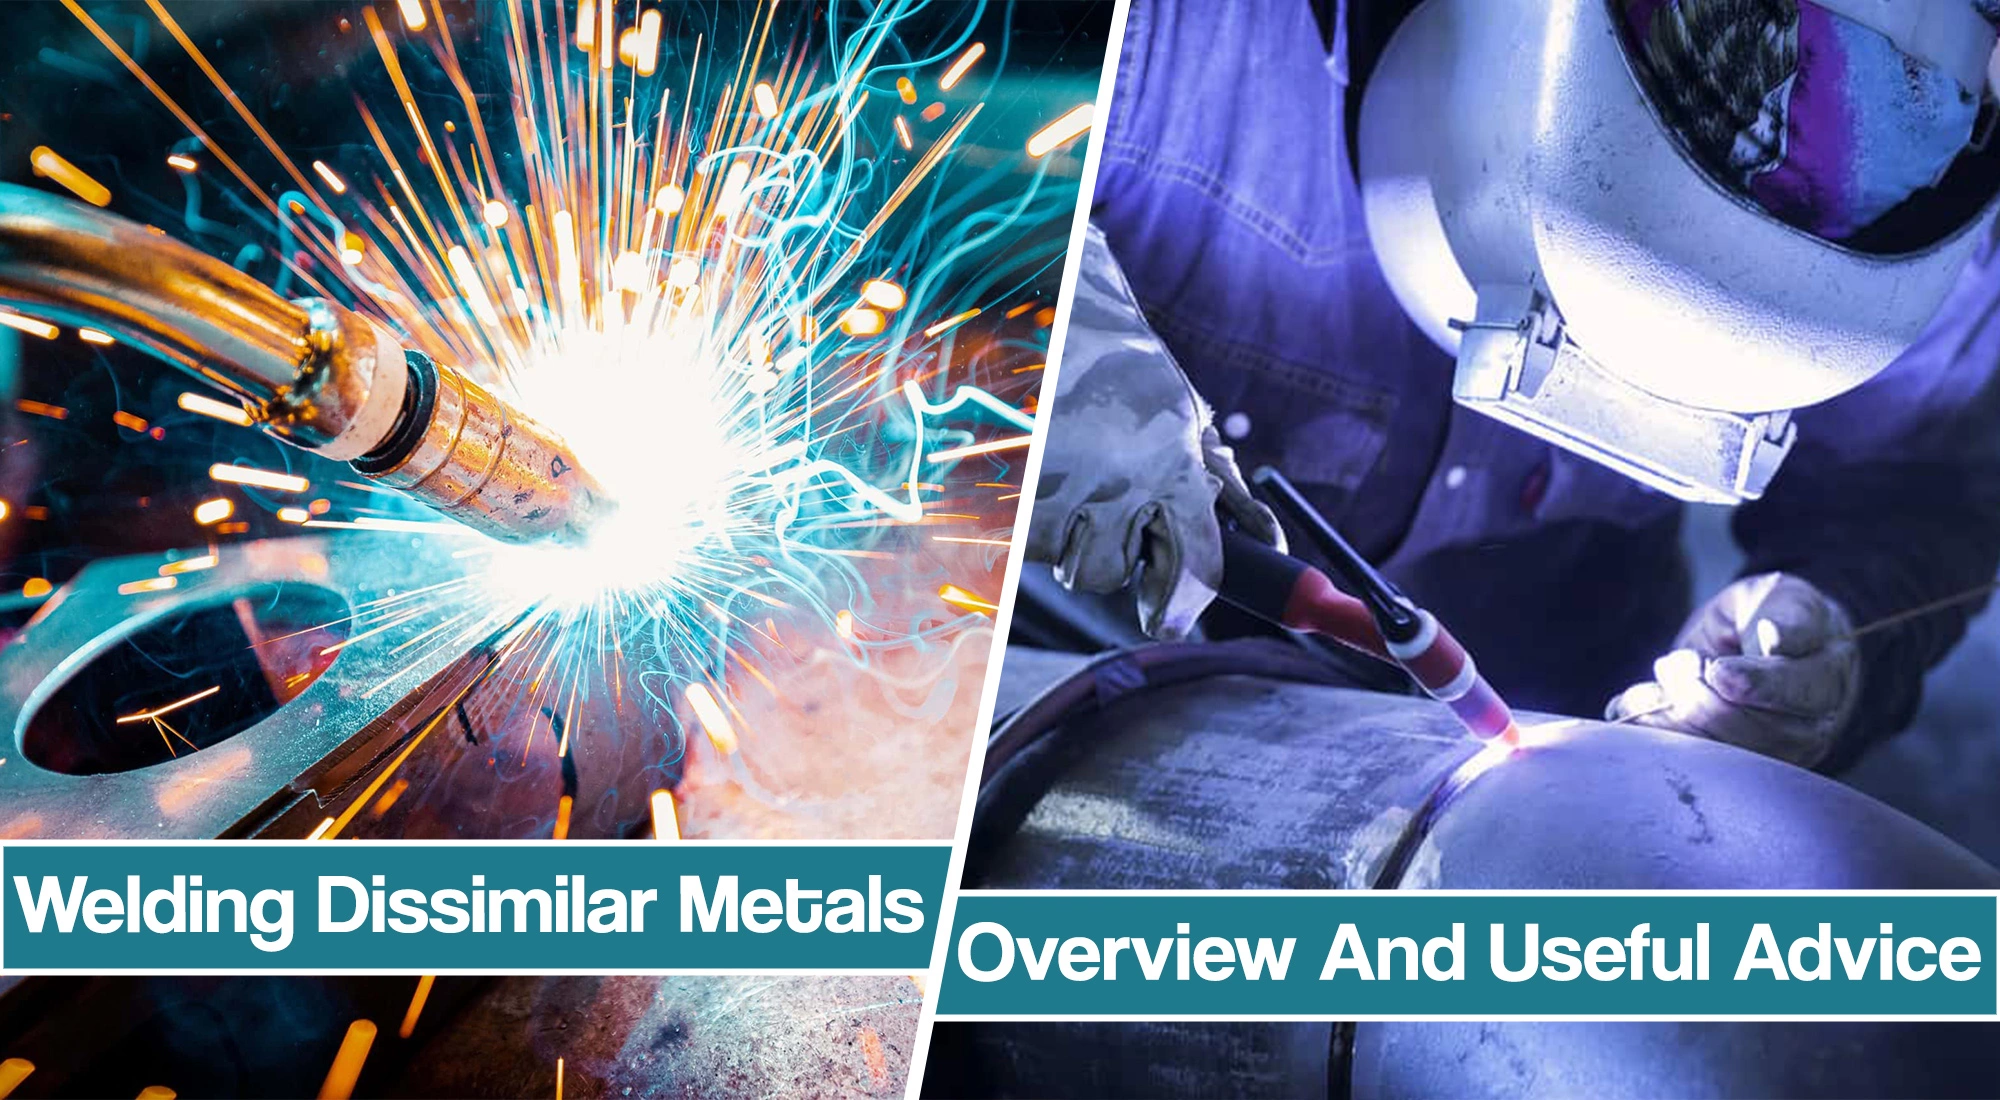 How To Weld Dissimilar Metals With All Welding Processes